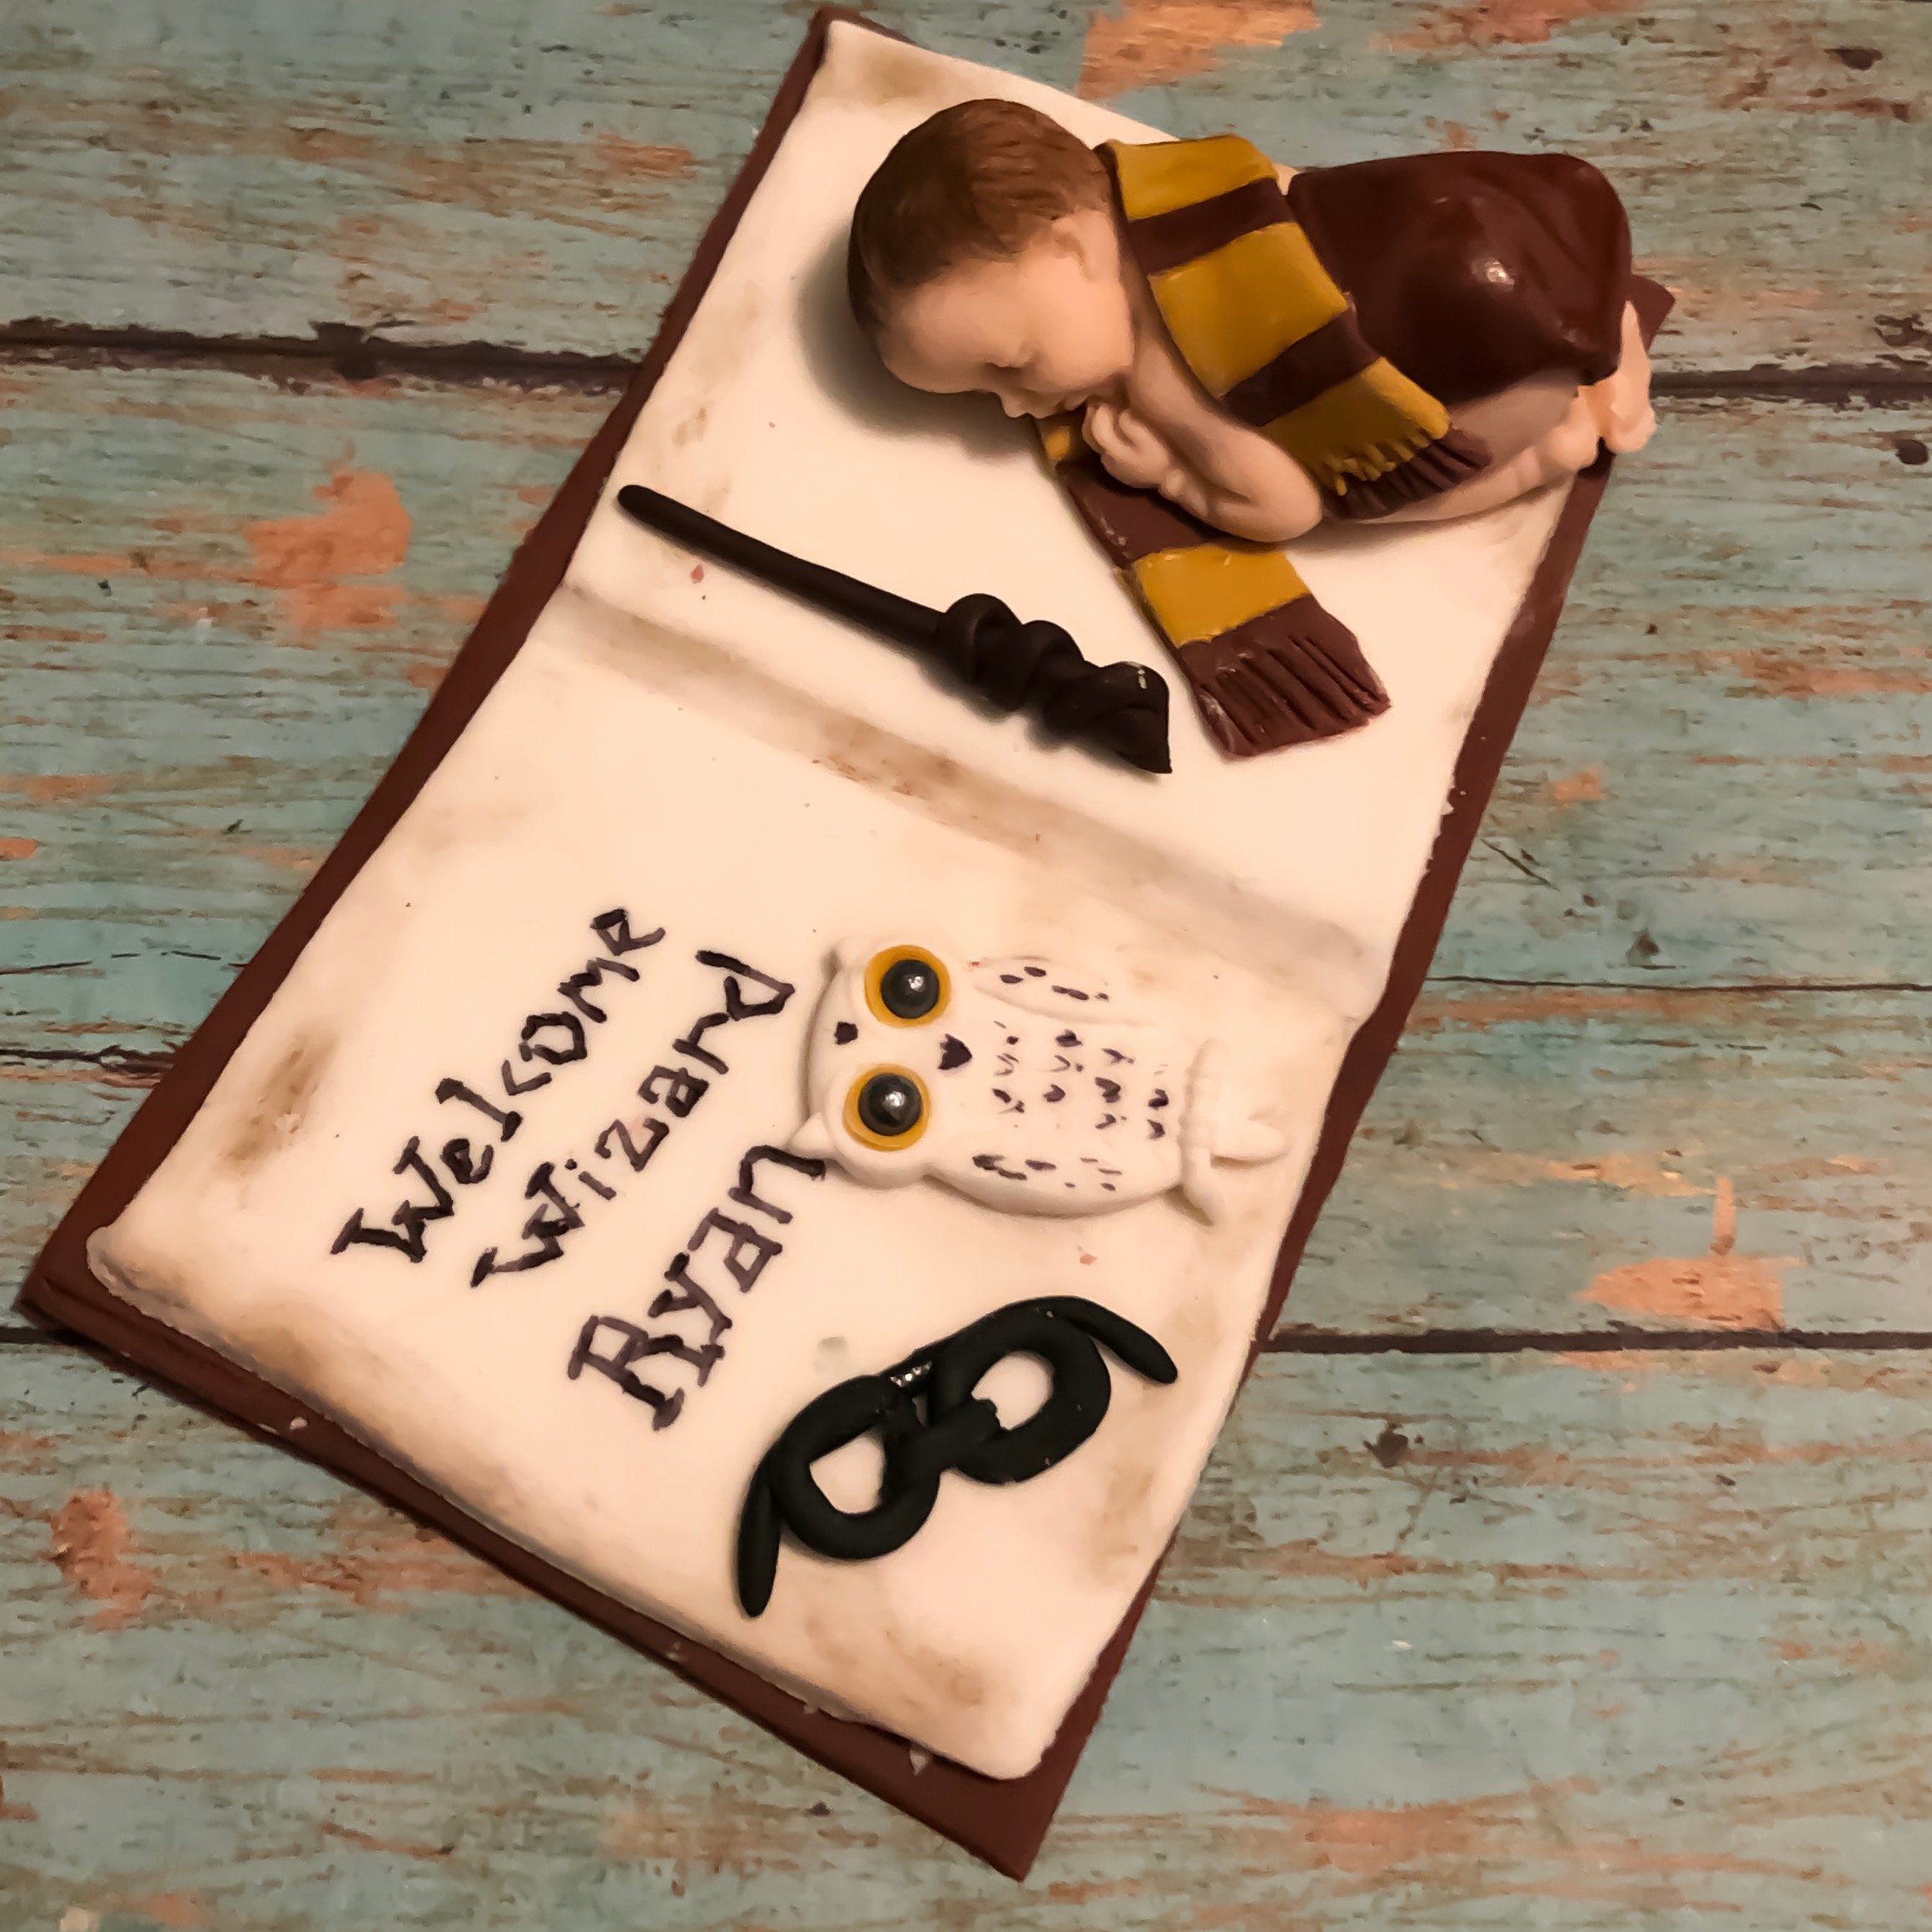 Sweet Cherub Edible Art and Printing - Harry potter baby shower cake.  Buttercream finish with buttercream and fondant details, with a delicious  blackforrest cake on the inside.😋 Please be aware I will